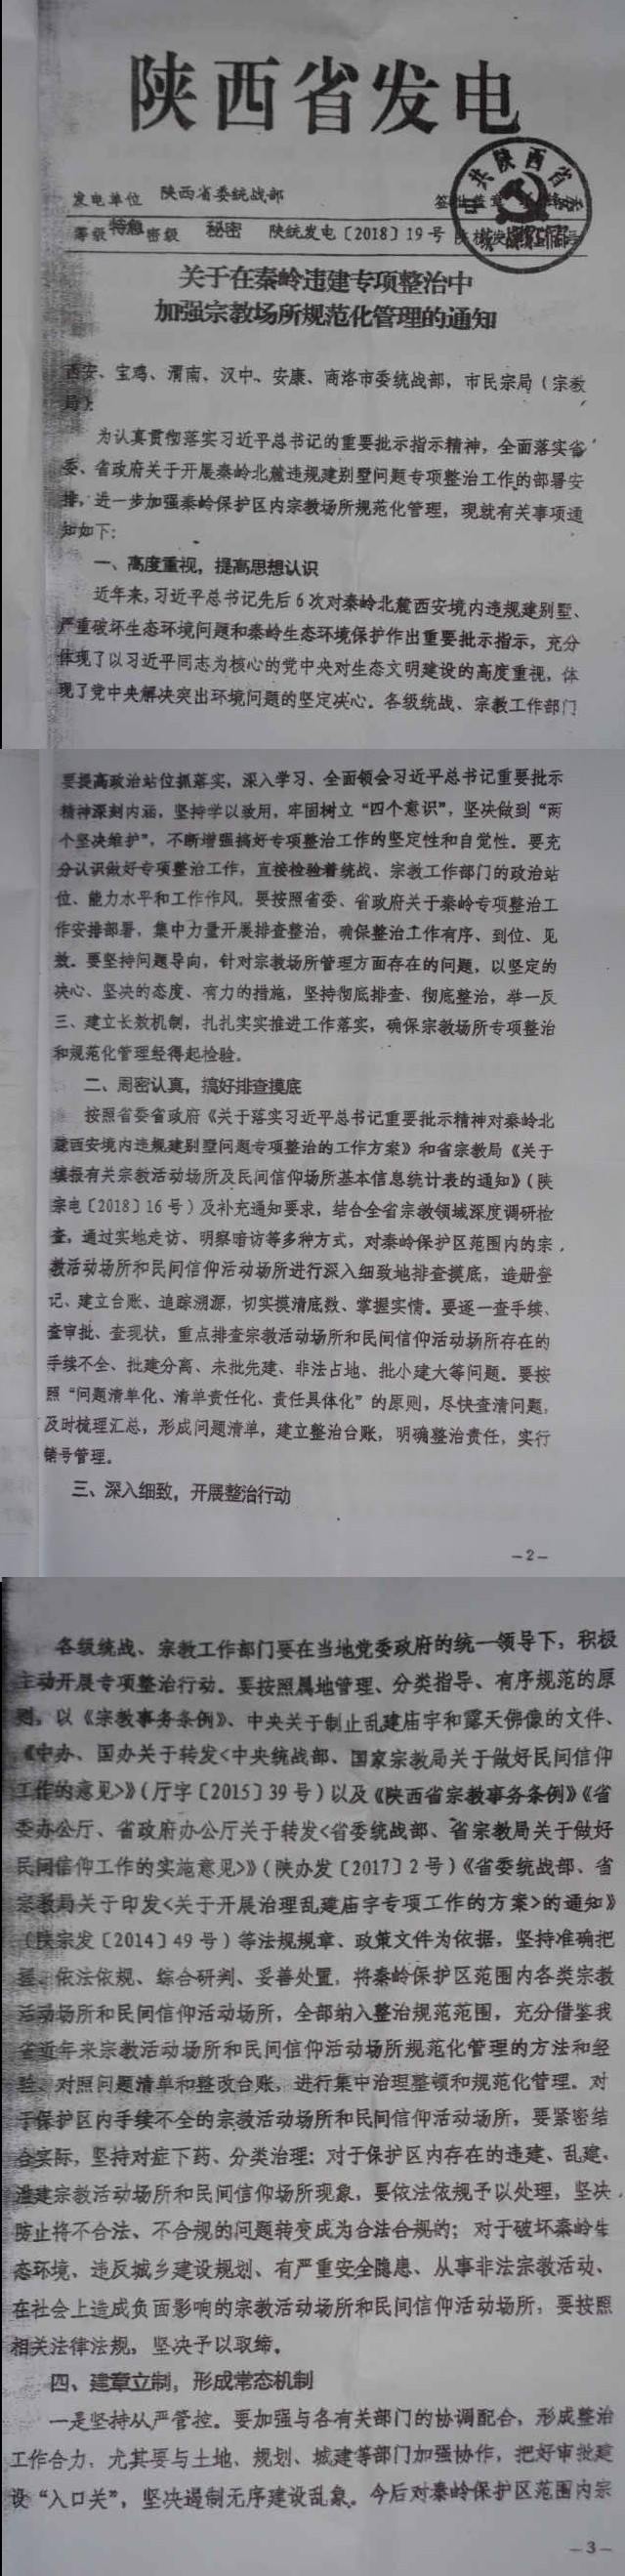 Document-issued-by-the-Shaanxi-Provincial